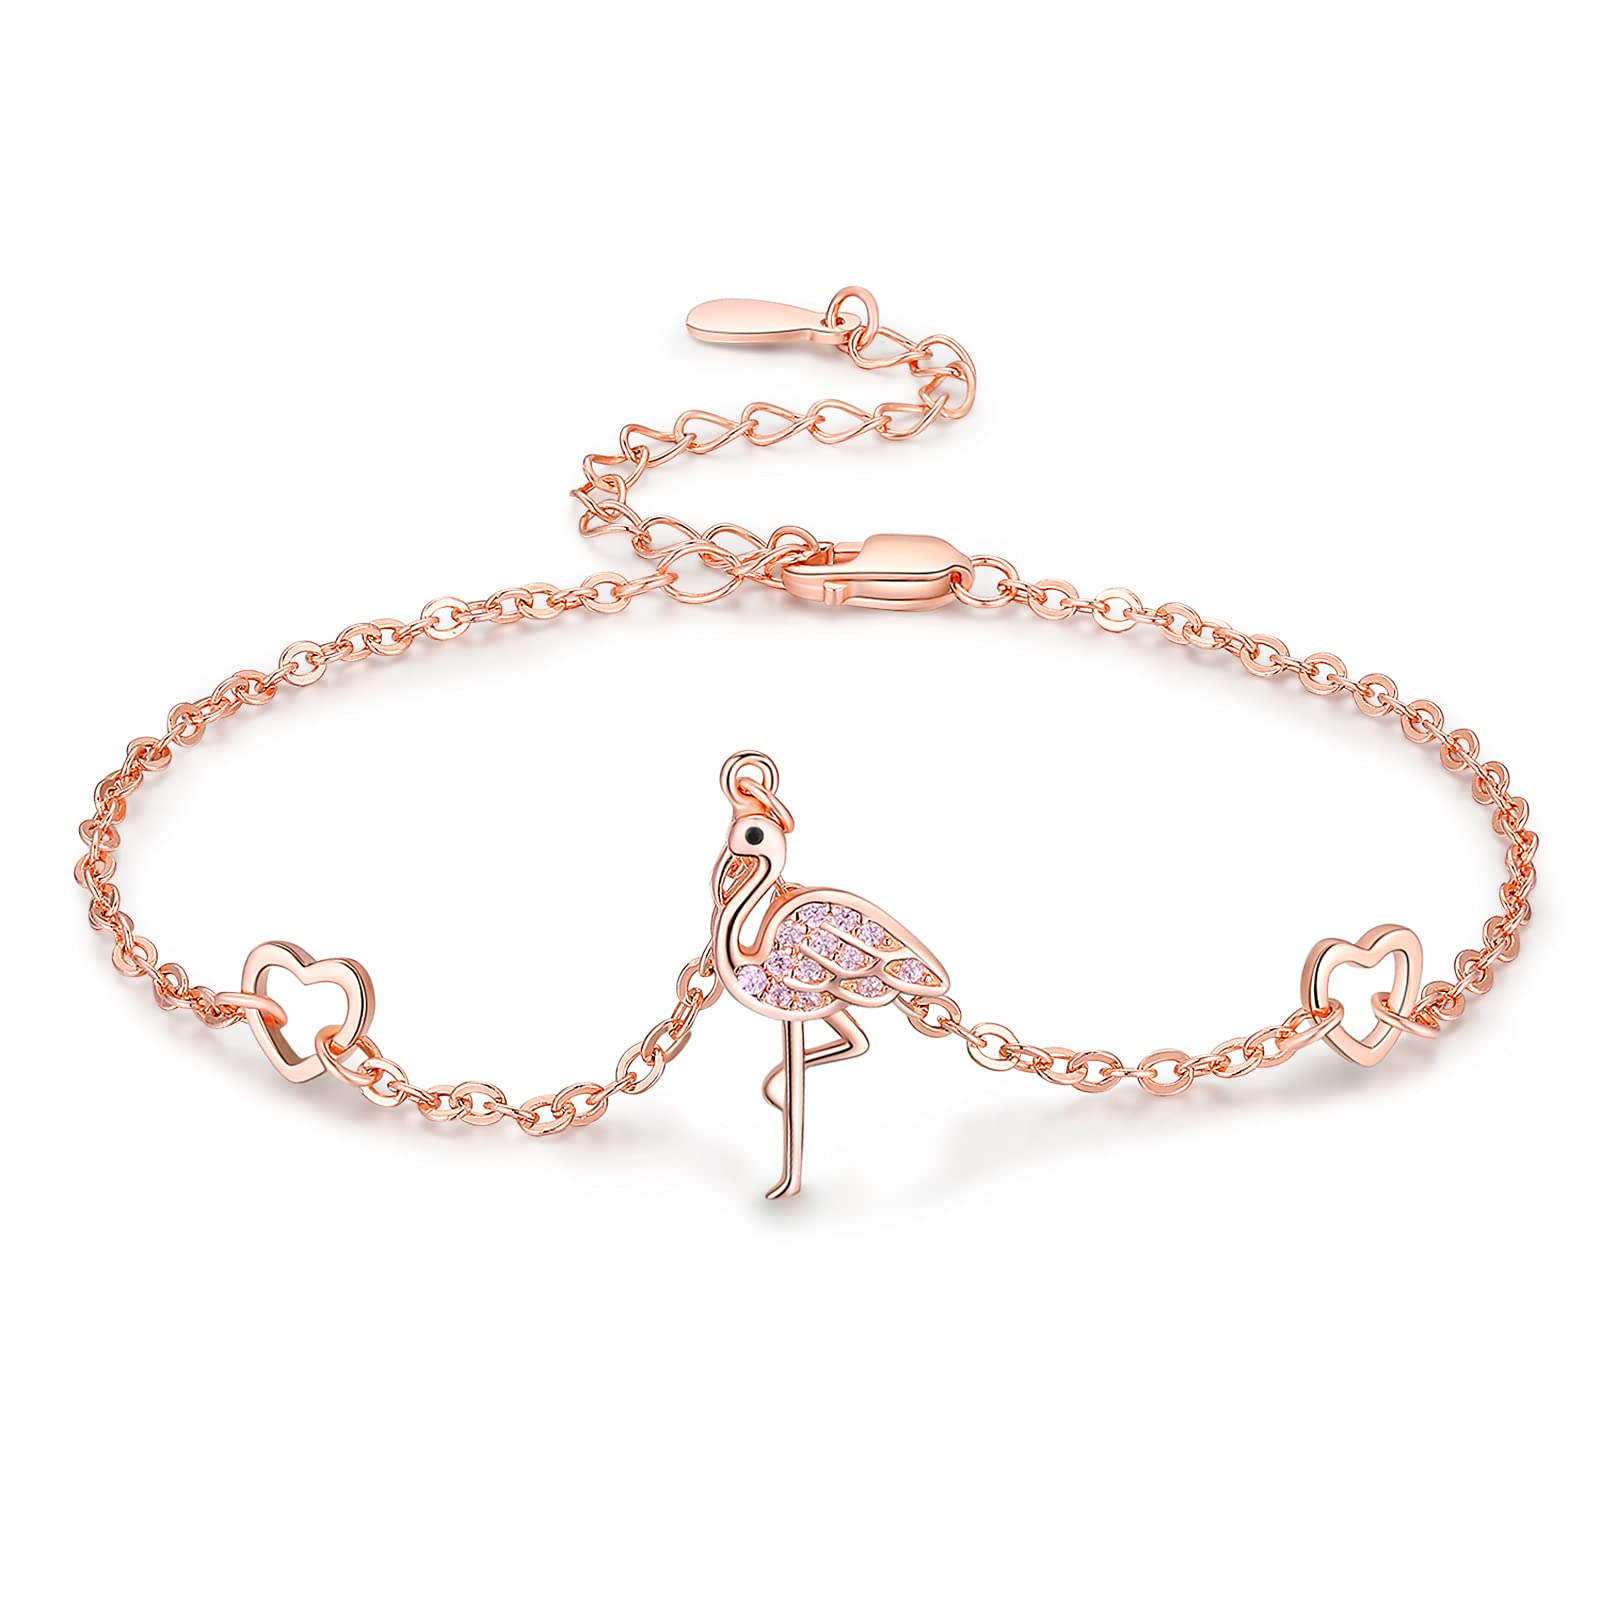 Dainty Charm Bracelets Animal Jewelry Birthday Gifts for Mother Daughter Teens Girls